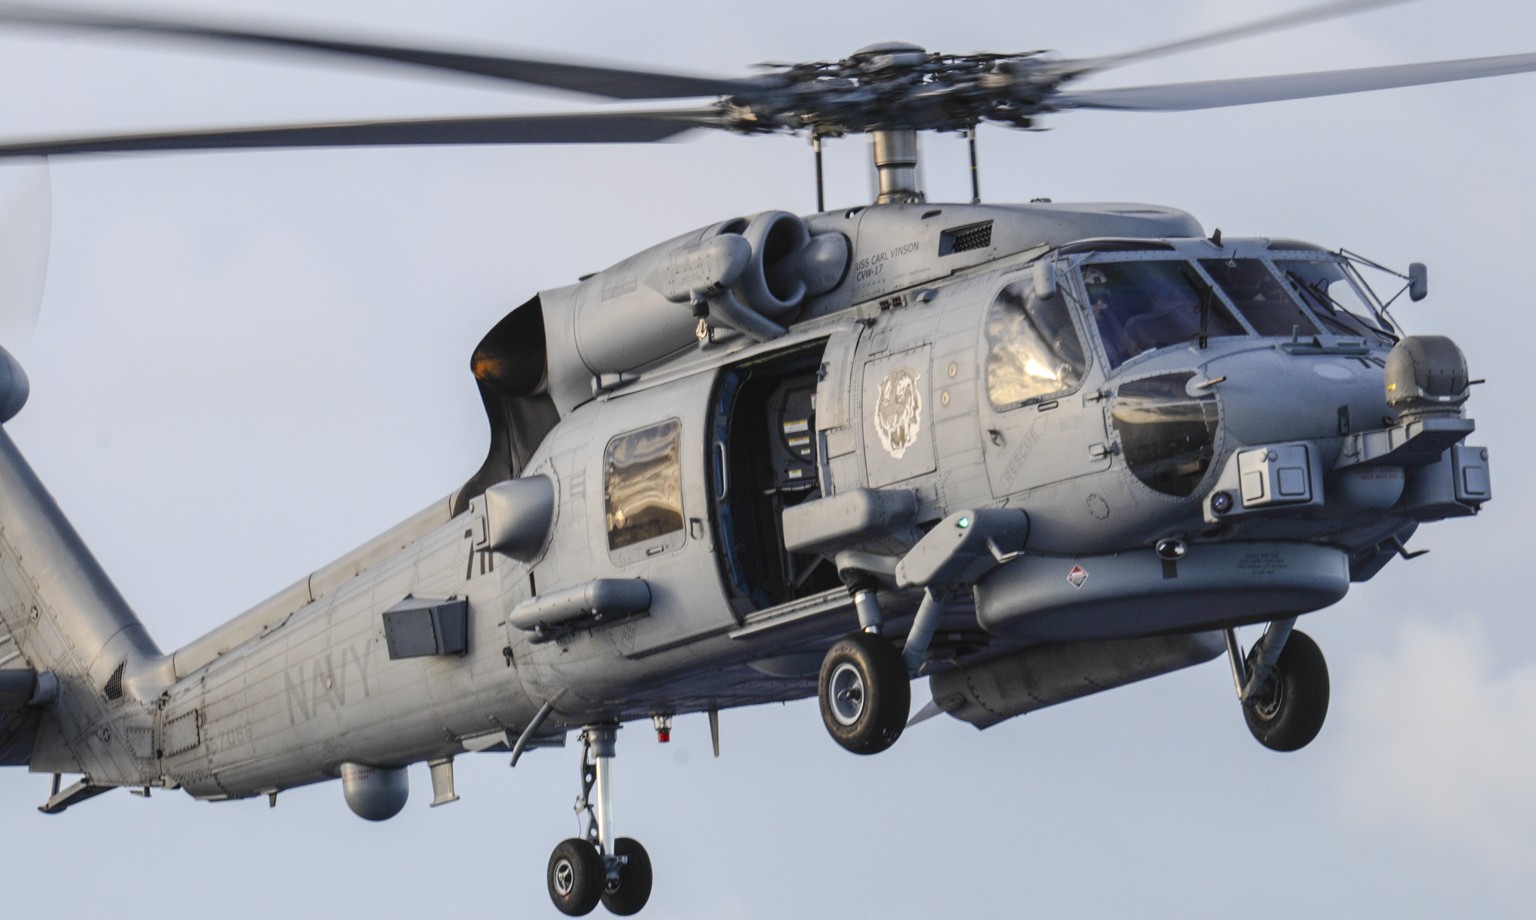 hsm-73 battlecats helicopter maritime strike squadron us navy mh-60r seahawk 2014 54